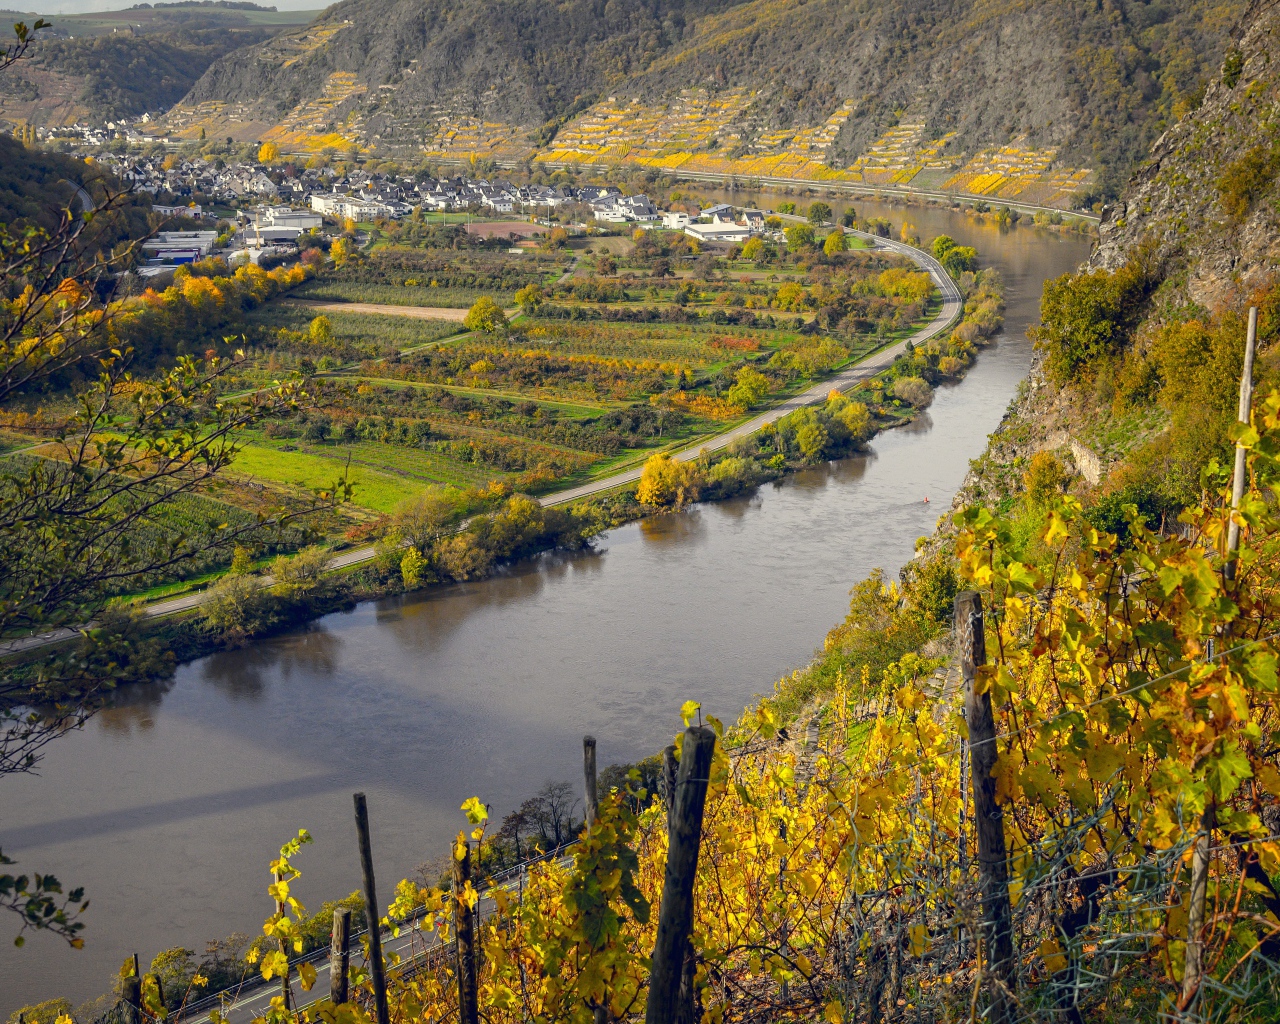 Top view of the river and vineyards